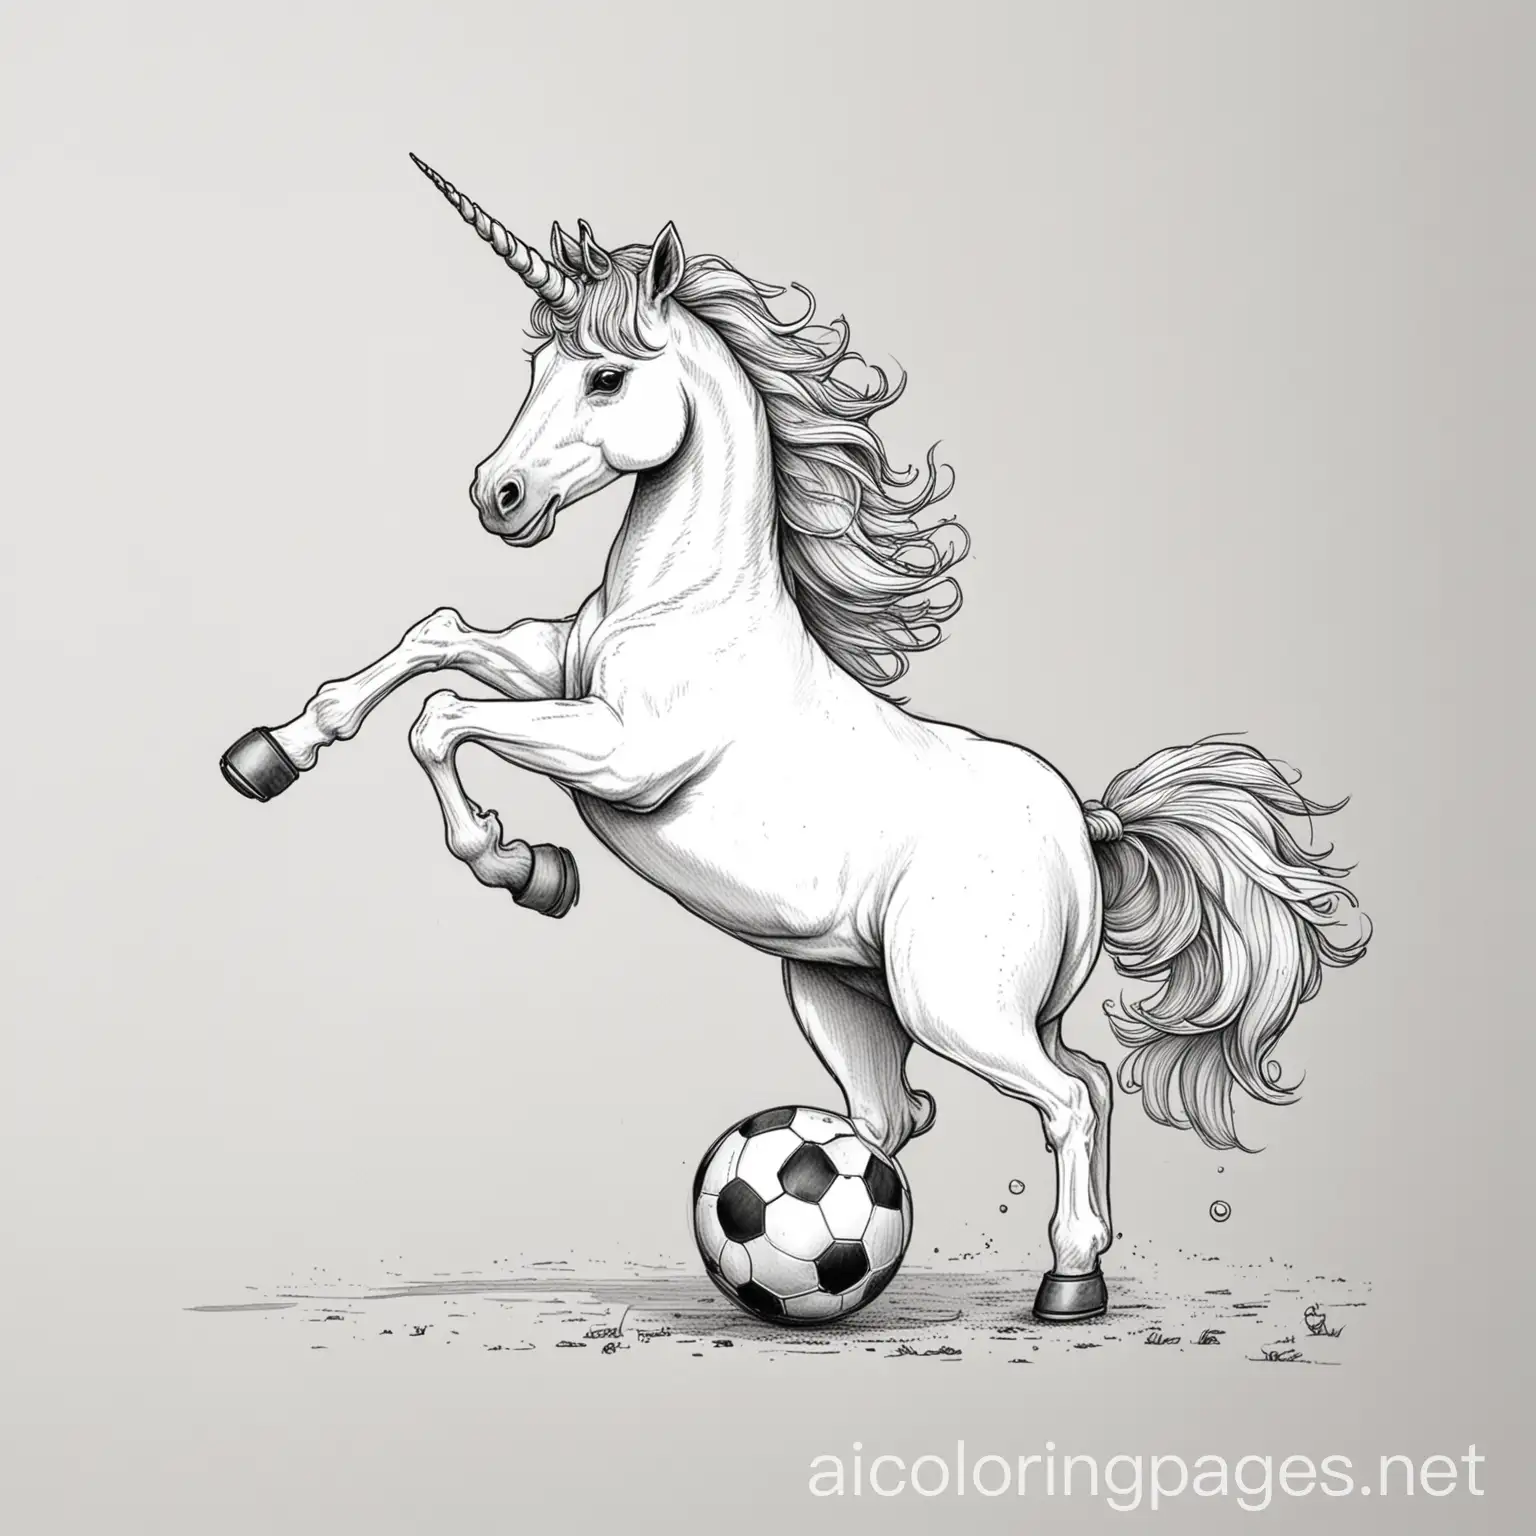 unicorn playing soccer, Coloring Page, black and white, line art, white background, Simplicity, Ample White Space